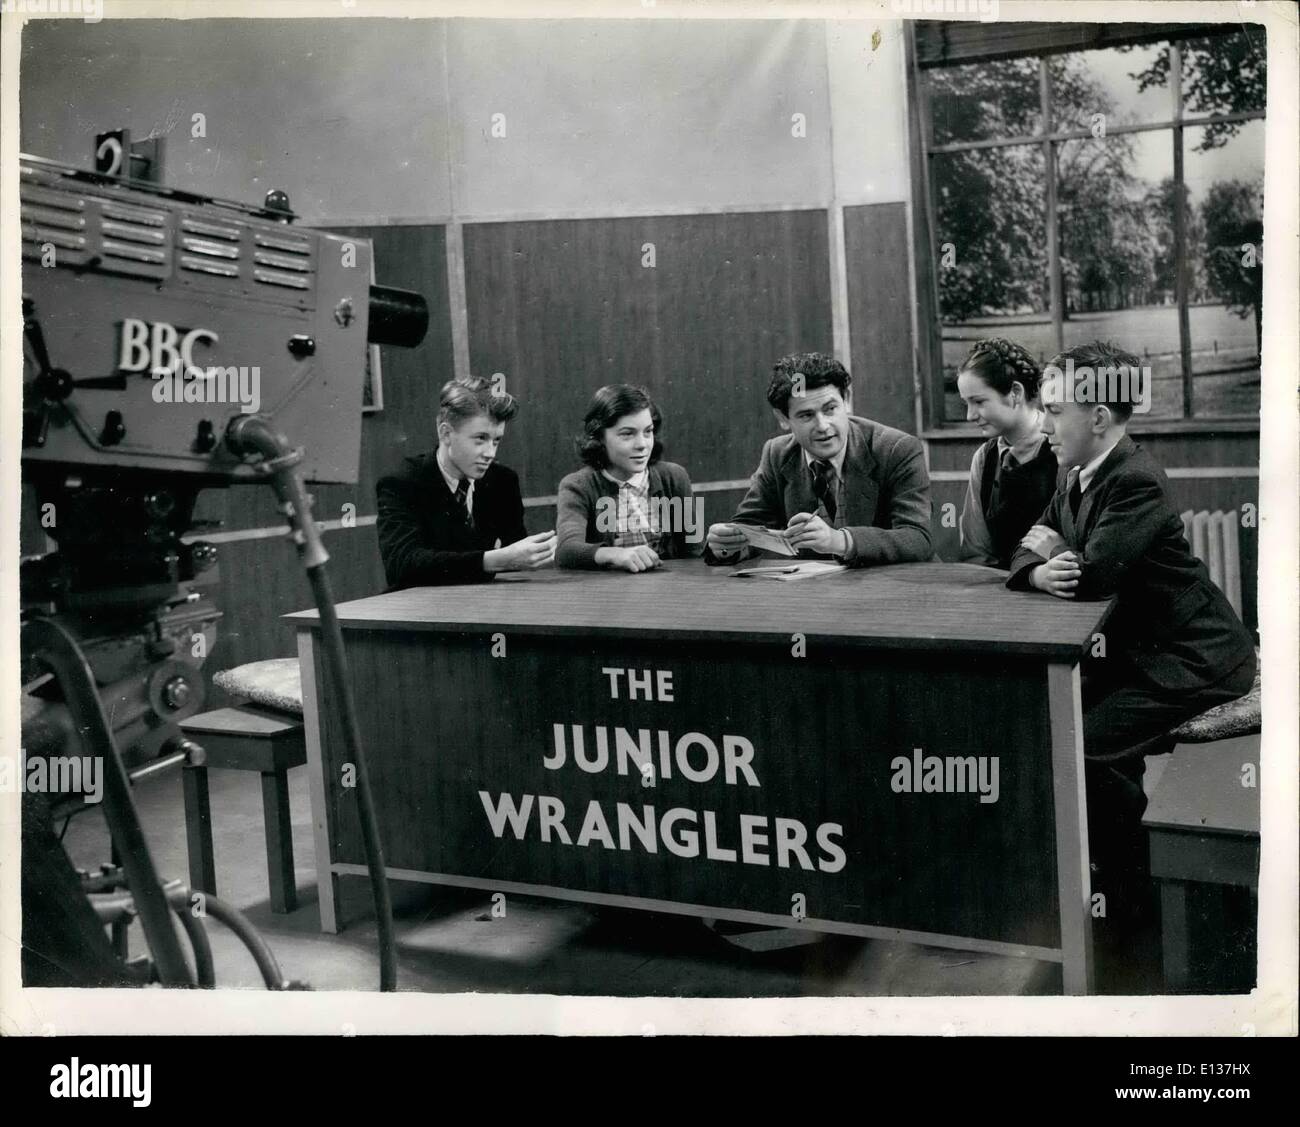 Feb. 29, 2012 - The ''Junior Wrangler'' of the B.B.C. New Children's Hour ''quiz'' programme.: The new B.B.C. Children's Hour television Programme ''Junior Wrangler: = went on the air for the first time this evening. The 'wranglers' are selected for each programme from twenty-five boys and girls. Two boys - and two girls meet each other before the TV cameras and debate questions sent in by viewers - under the chairmanship of Humpray Lestooq. Photo shows the four 'wranglers'' - and the questions master - during the quiz this evening Stock Photo